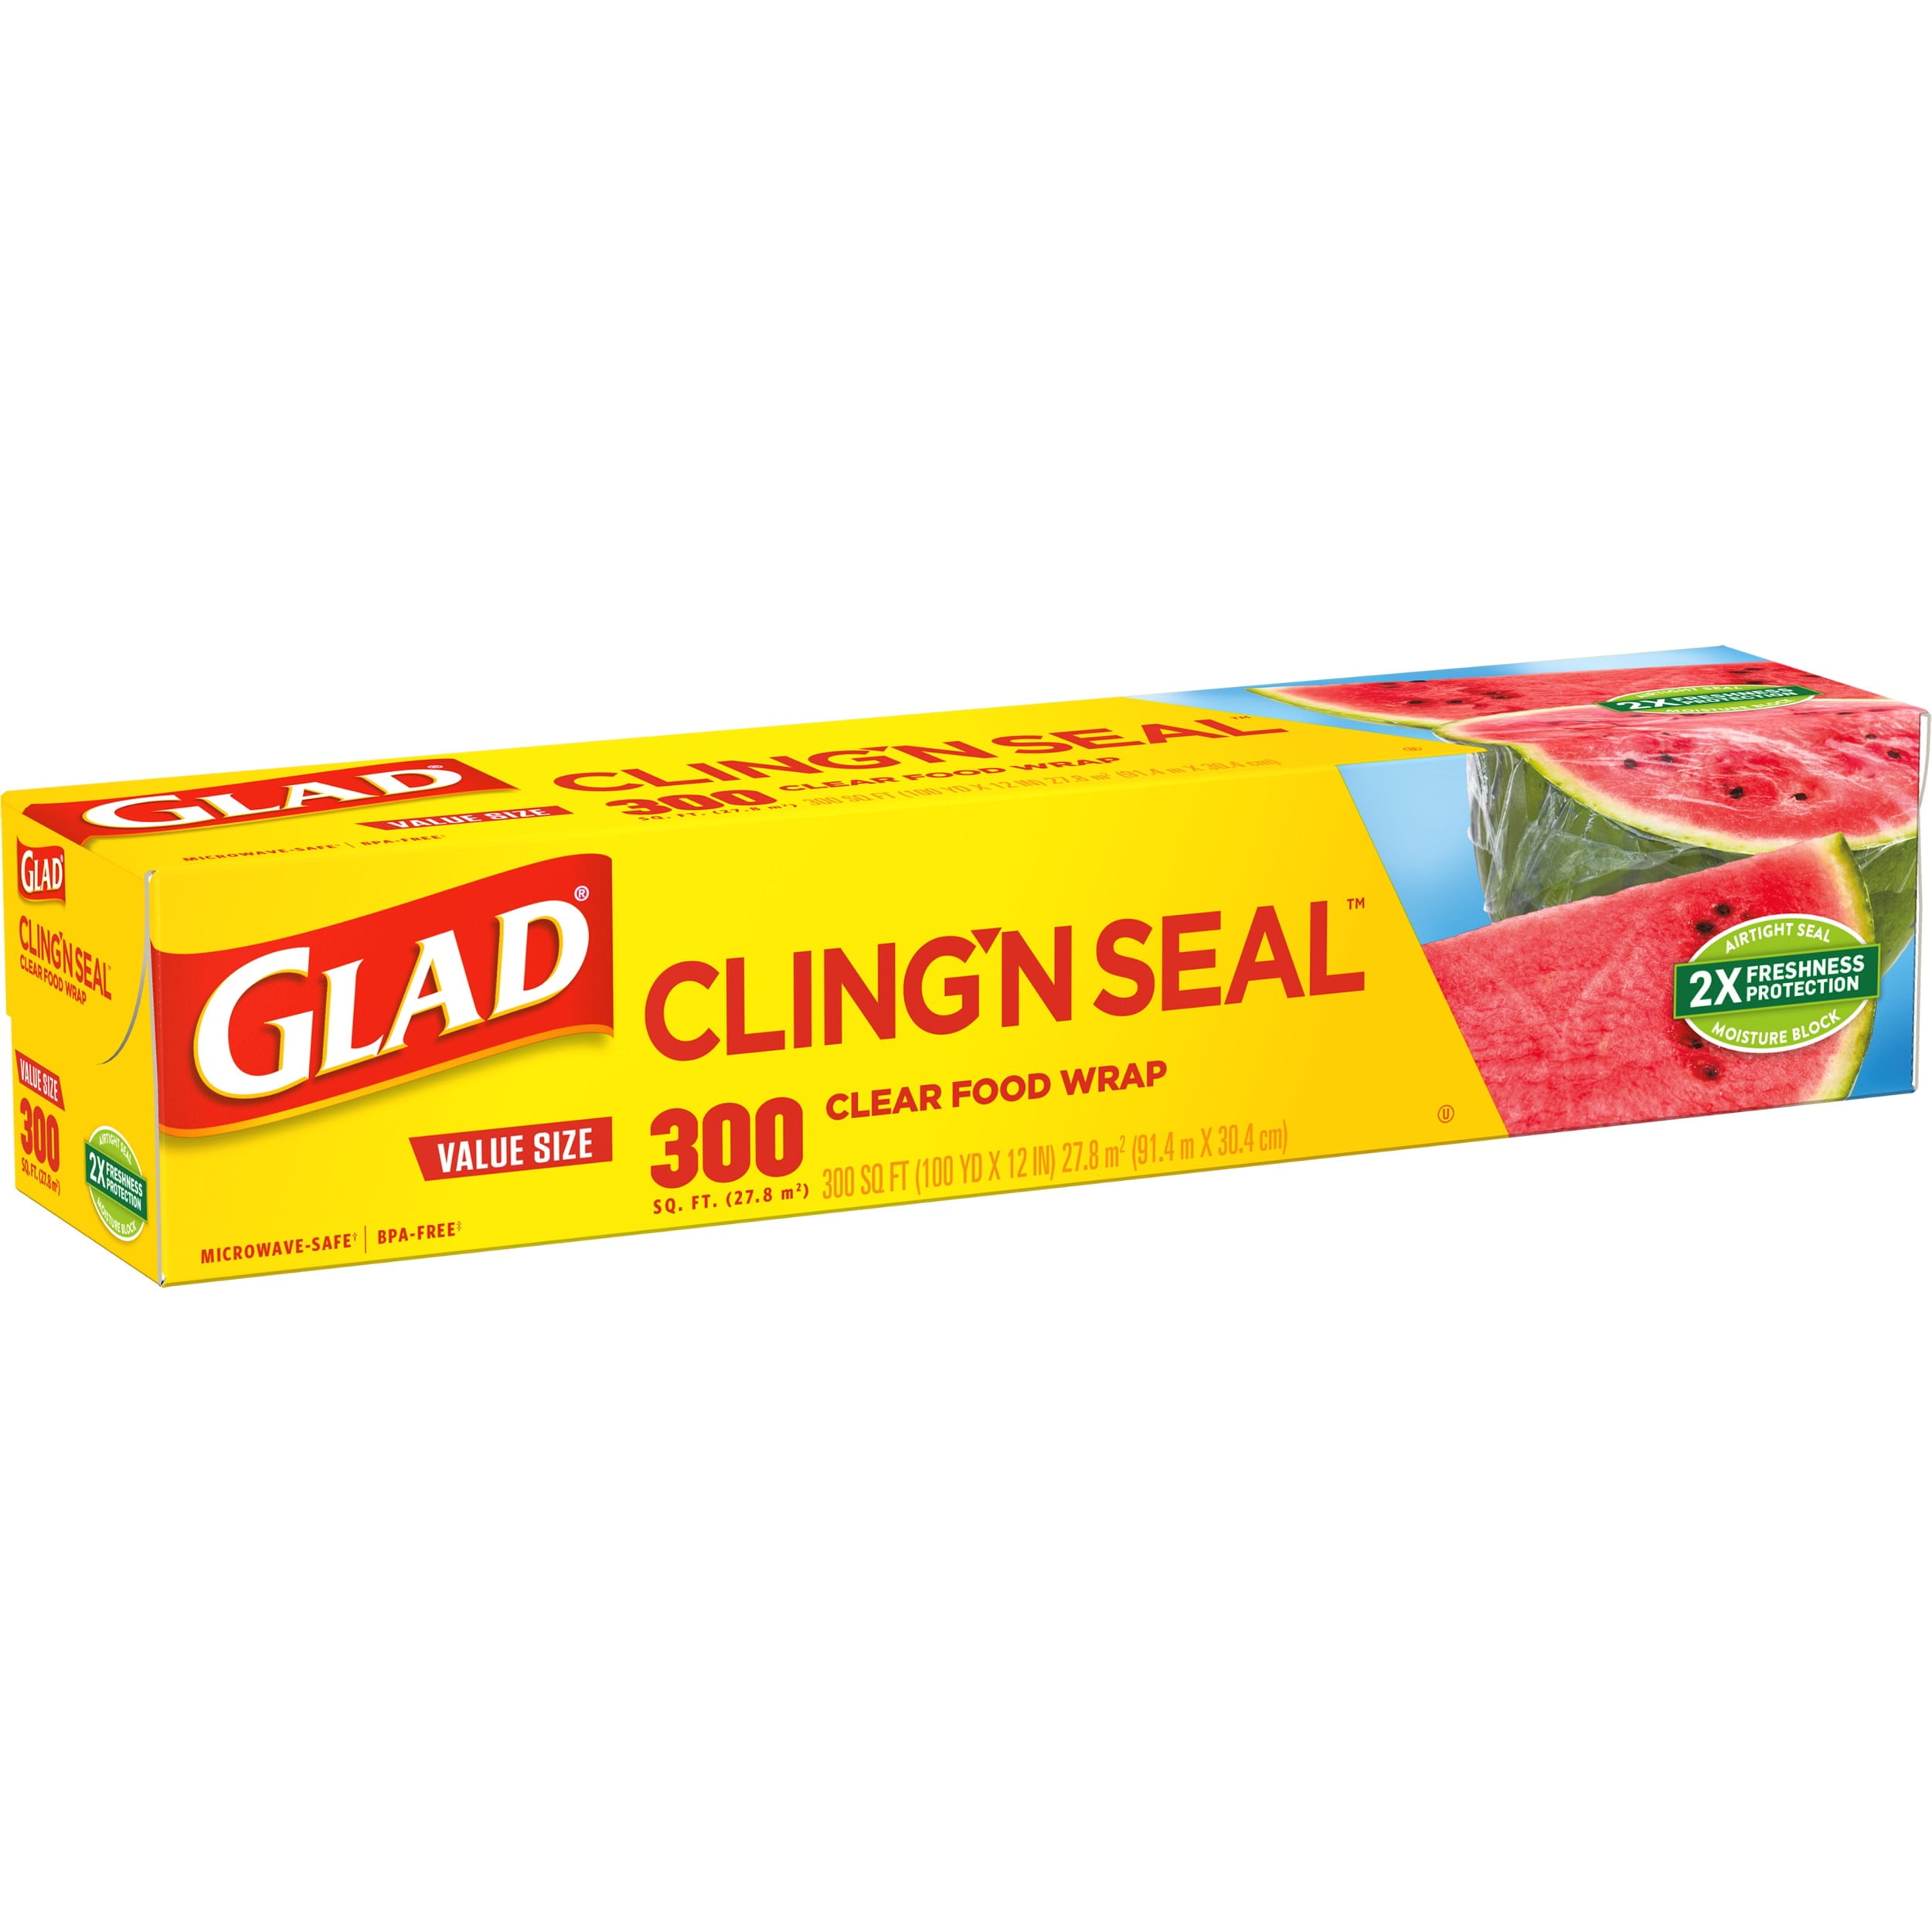 Wholesale Food Grade Cling Wrap Film Suppliers,manufacturers